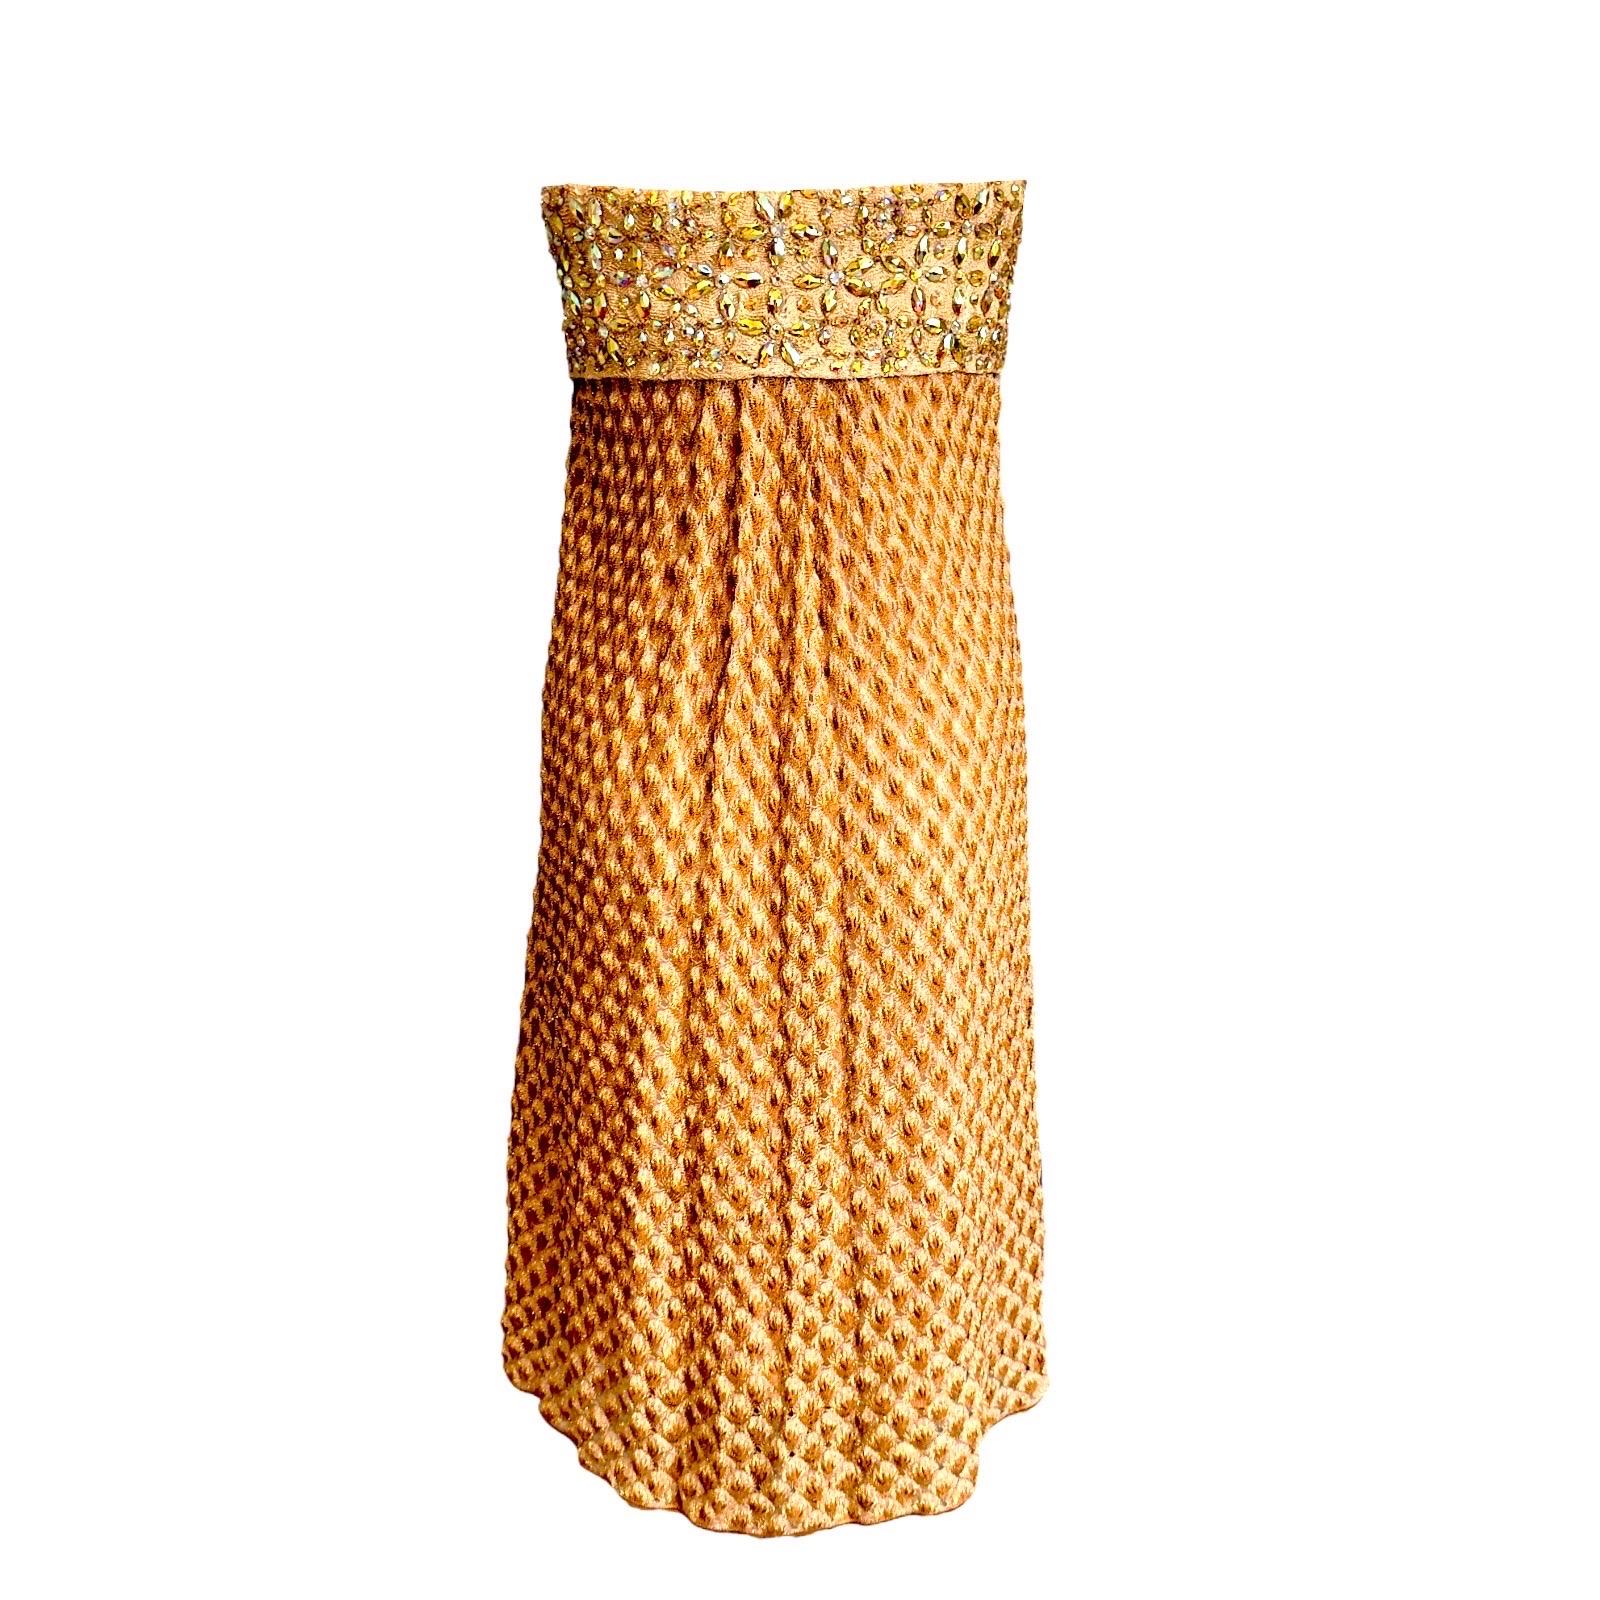 A stunning evening gown by MISSONI - a rare find!
Perfect a glamorous evening
Midi length
Golden shades with metallic lurex threads for a shimmering look
Bustier corset top for a perfect fit
Embellished upper part with crystals
Beautiful MISSONI